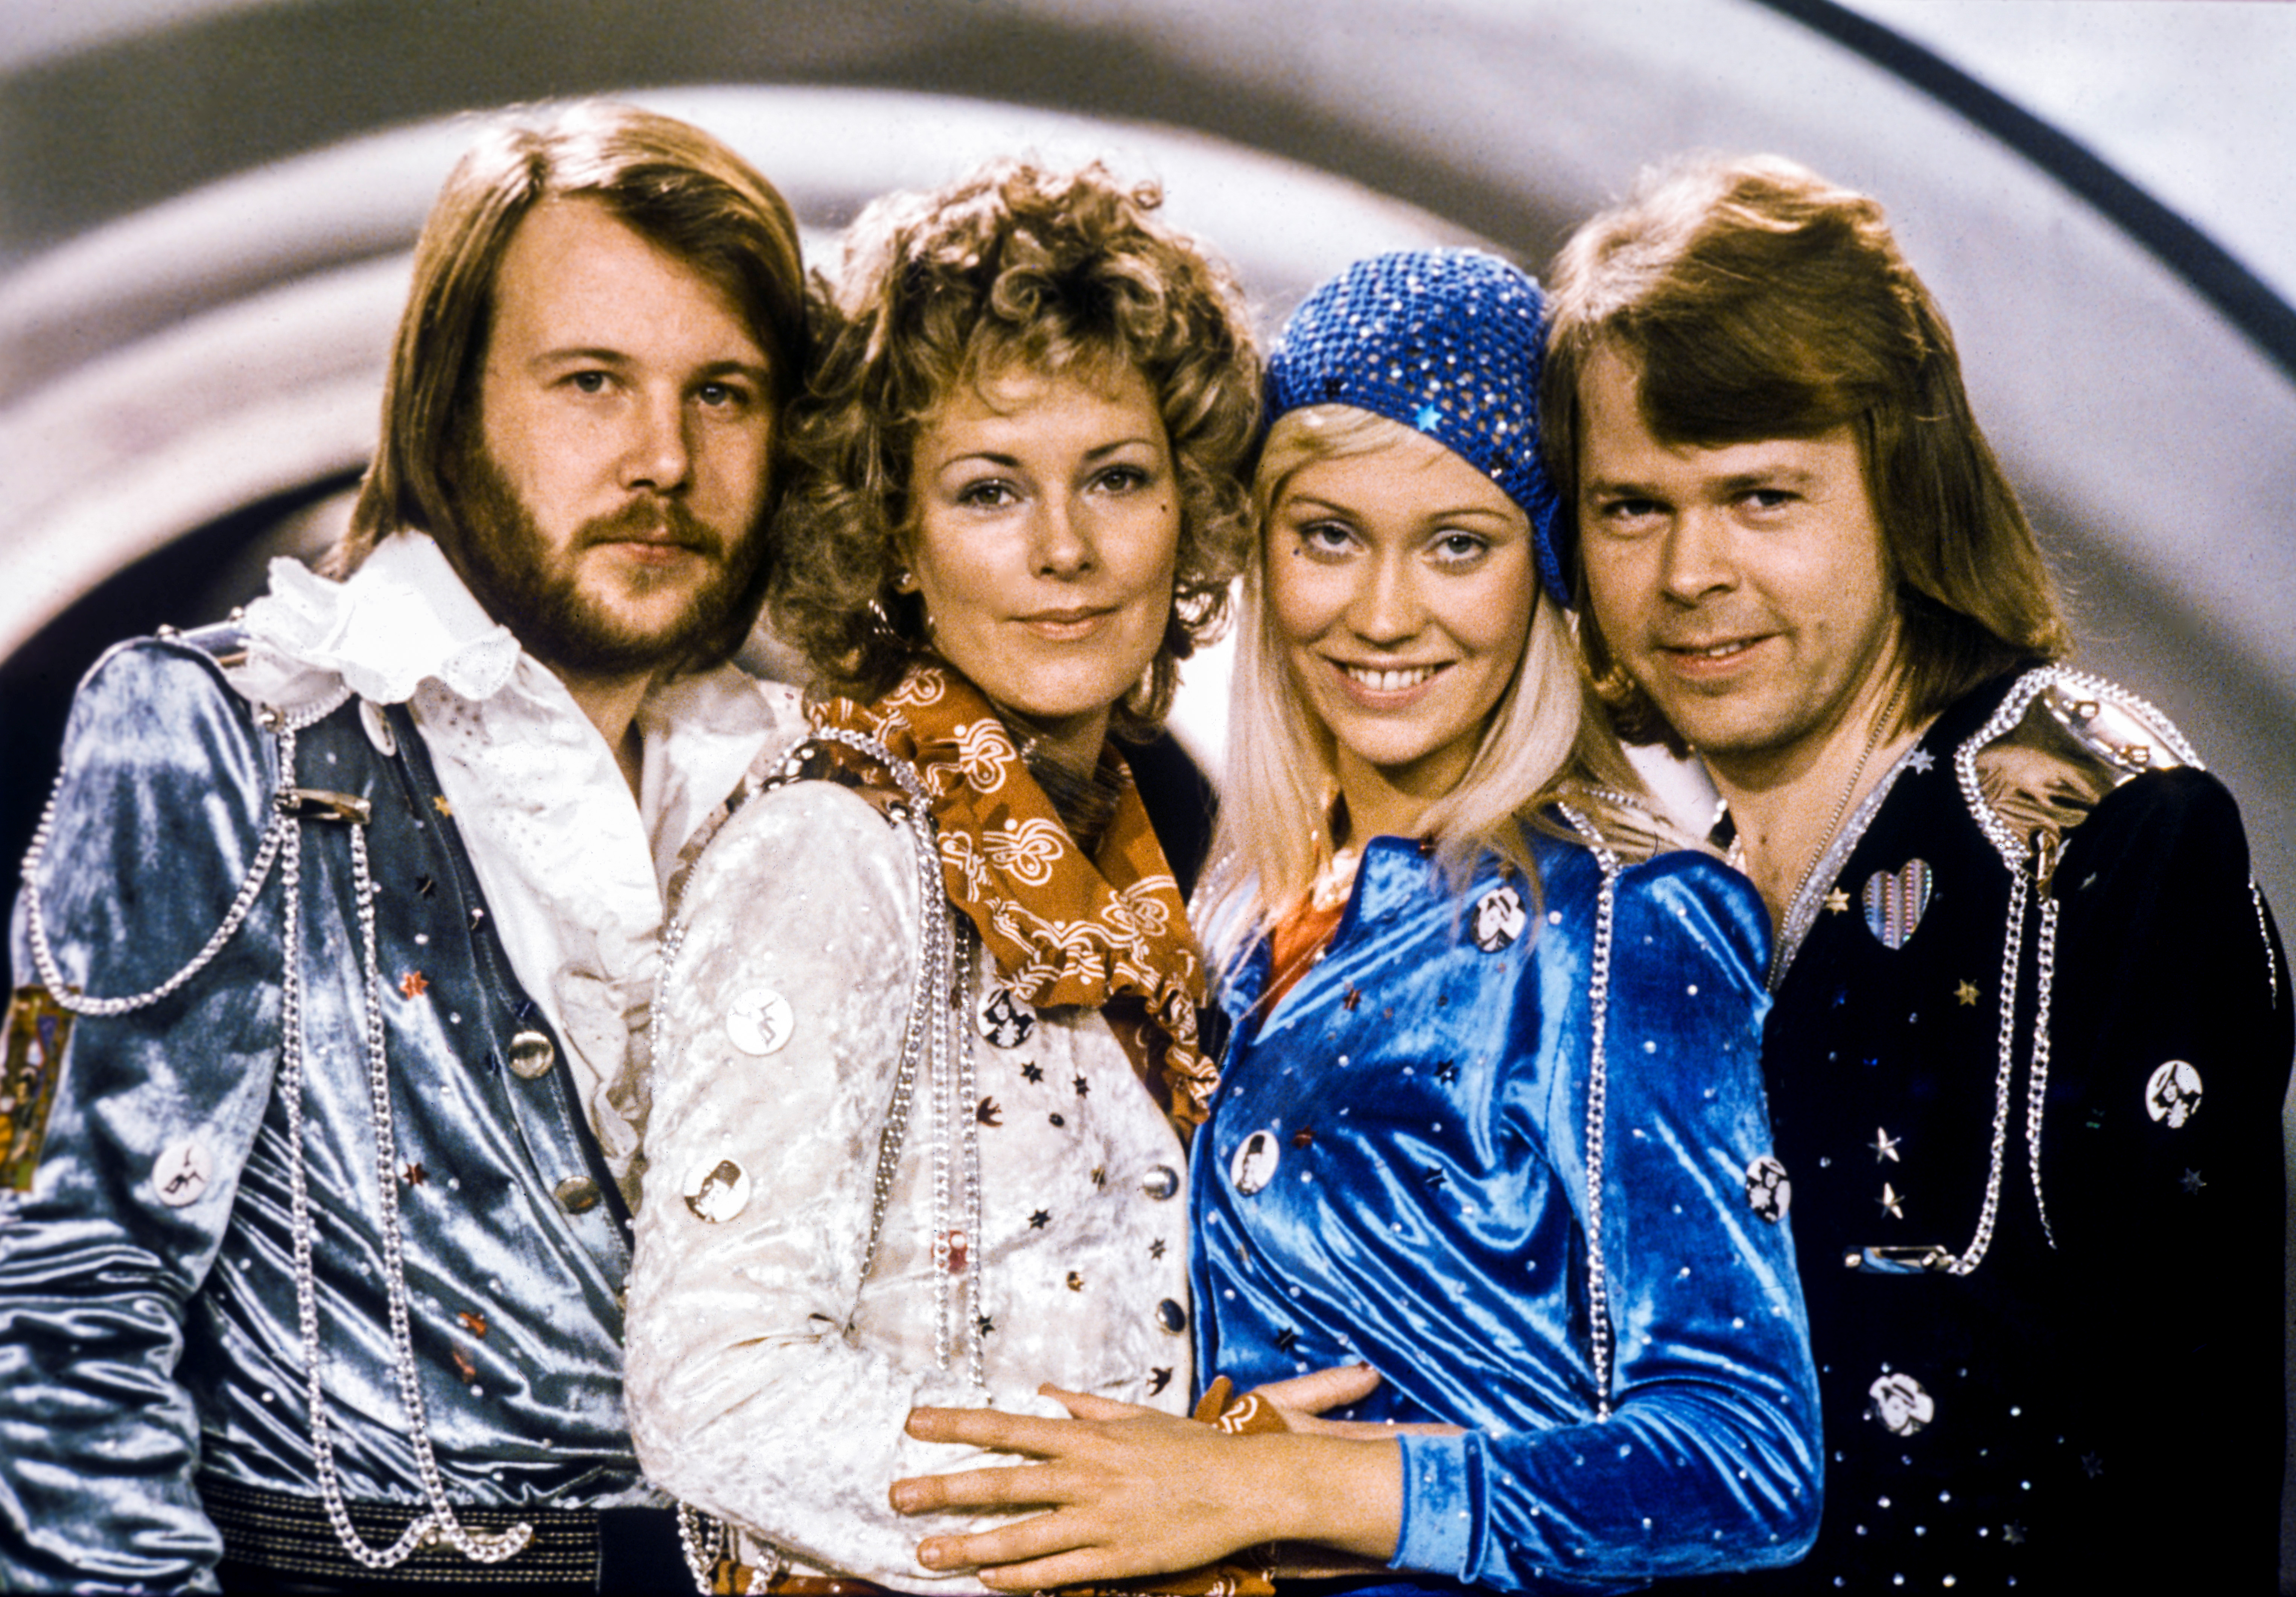 Swedish pop group Abba: Benny Andersson, Anni-Frid Lyngstad, Agnetha Faltskog and Bjorn Ulvaeus pose after winning the Swedish branch of the Eurovision Song Contest with their song 